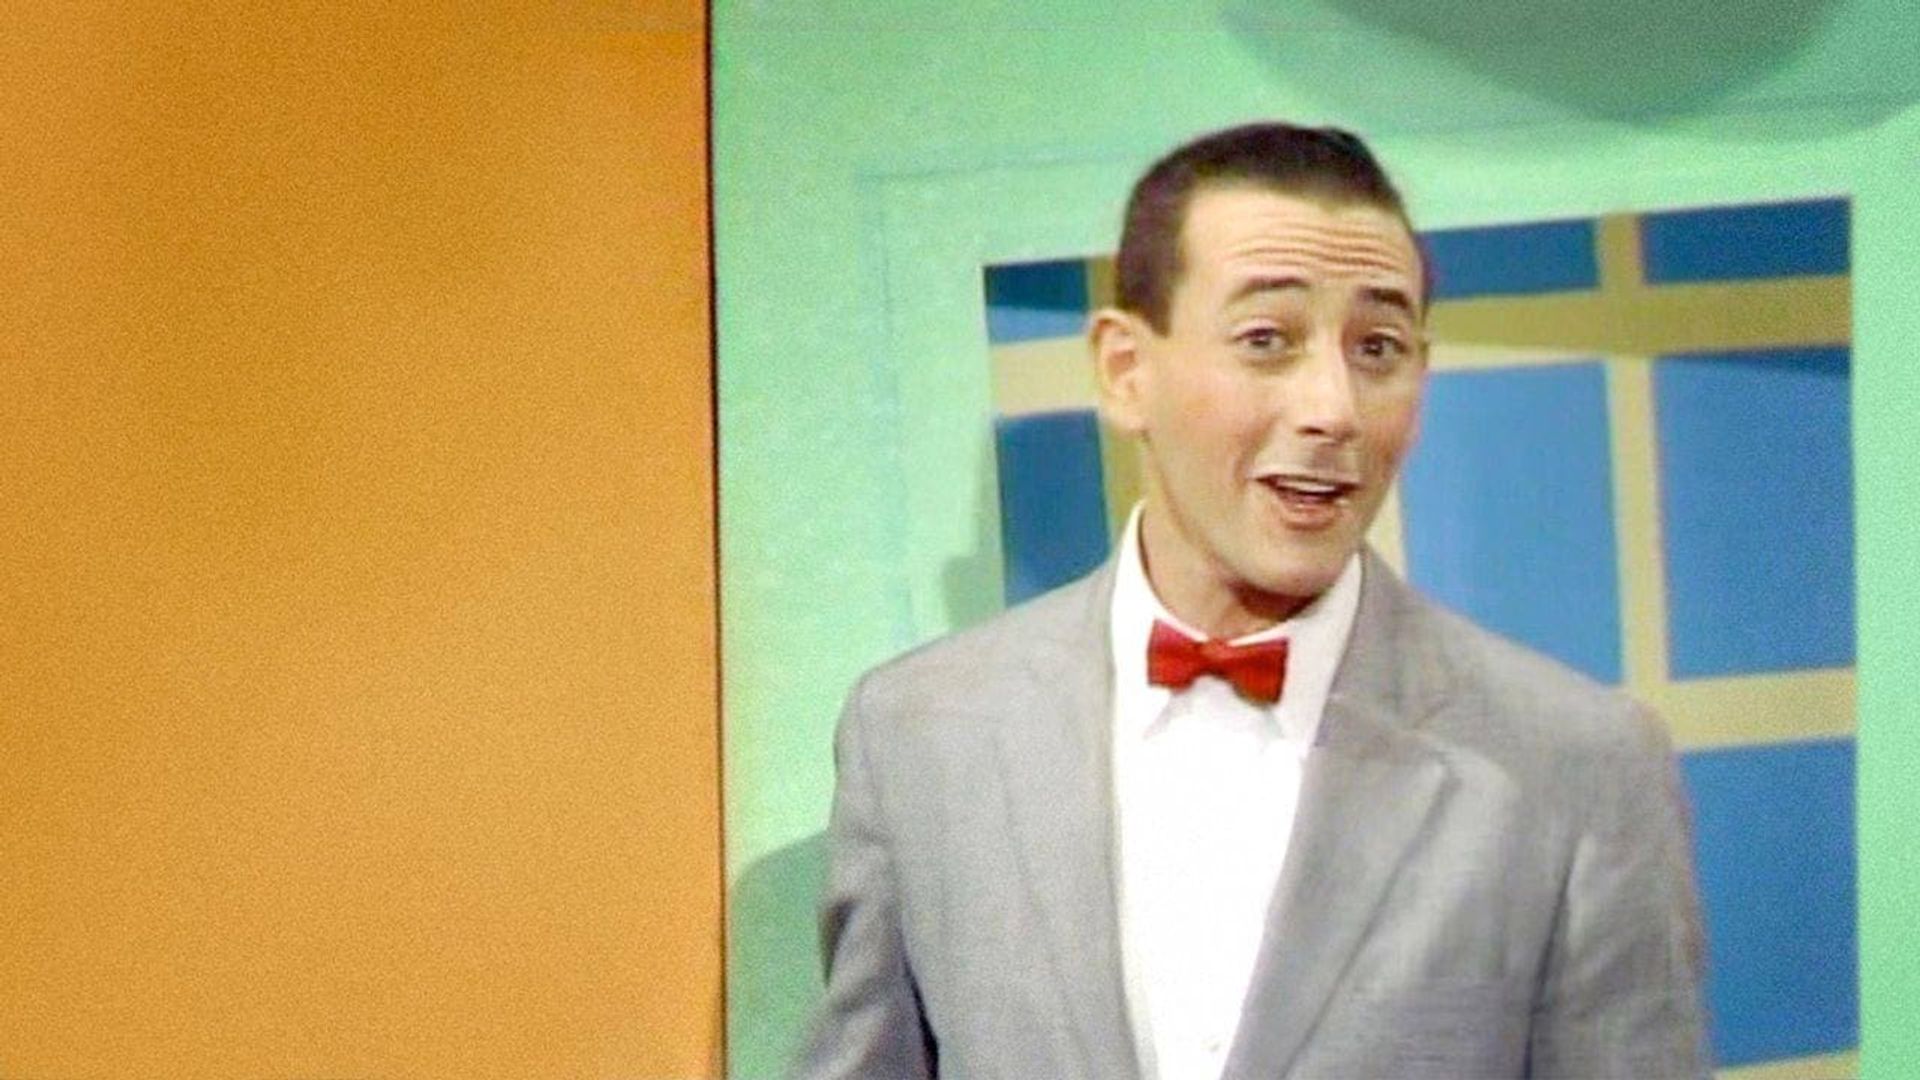 The Pee-Wee Herman Show background